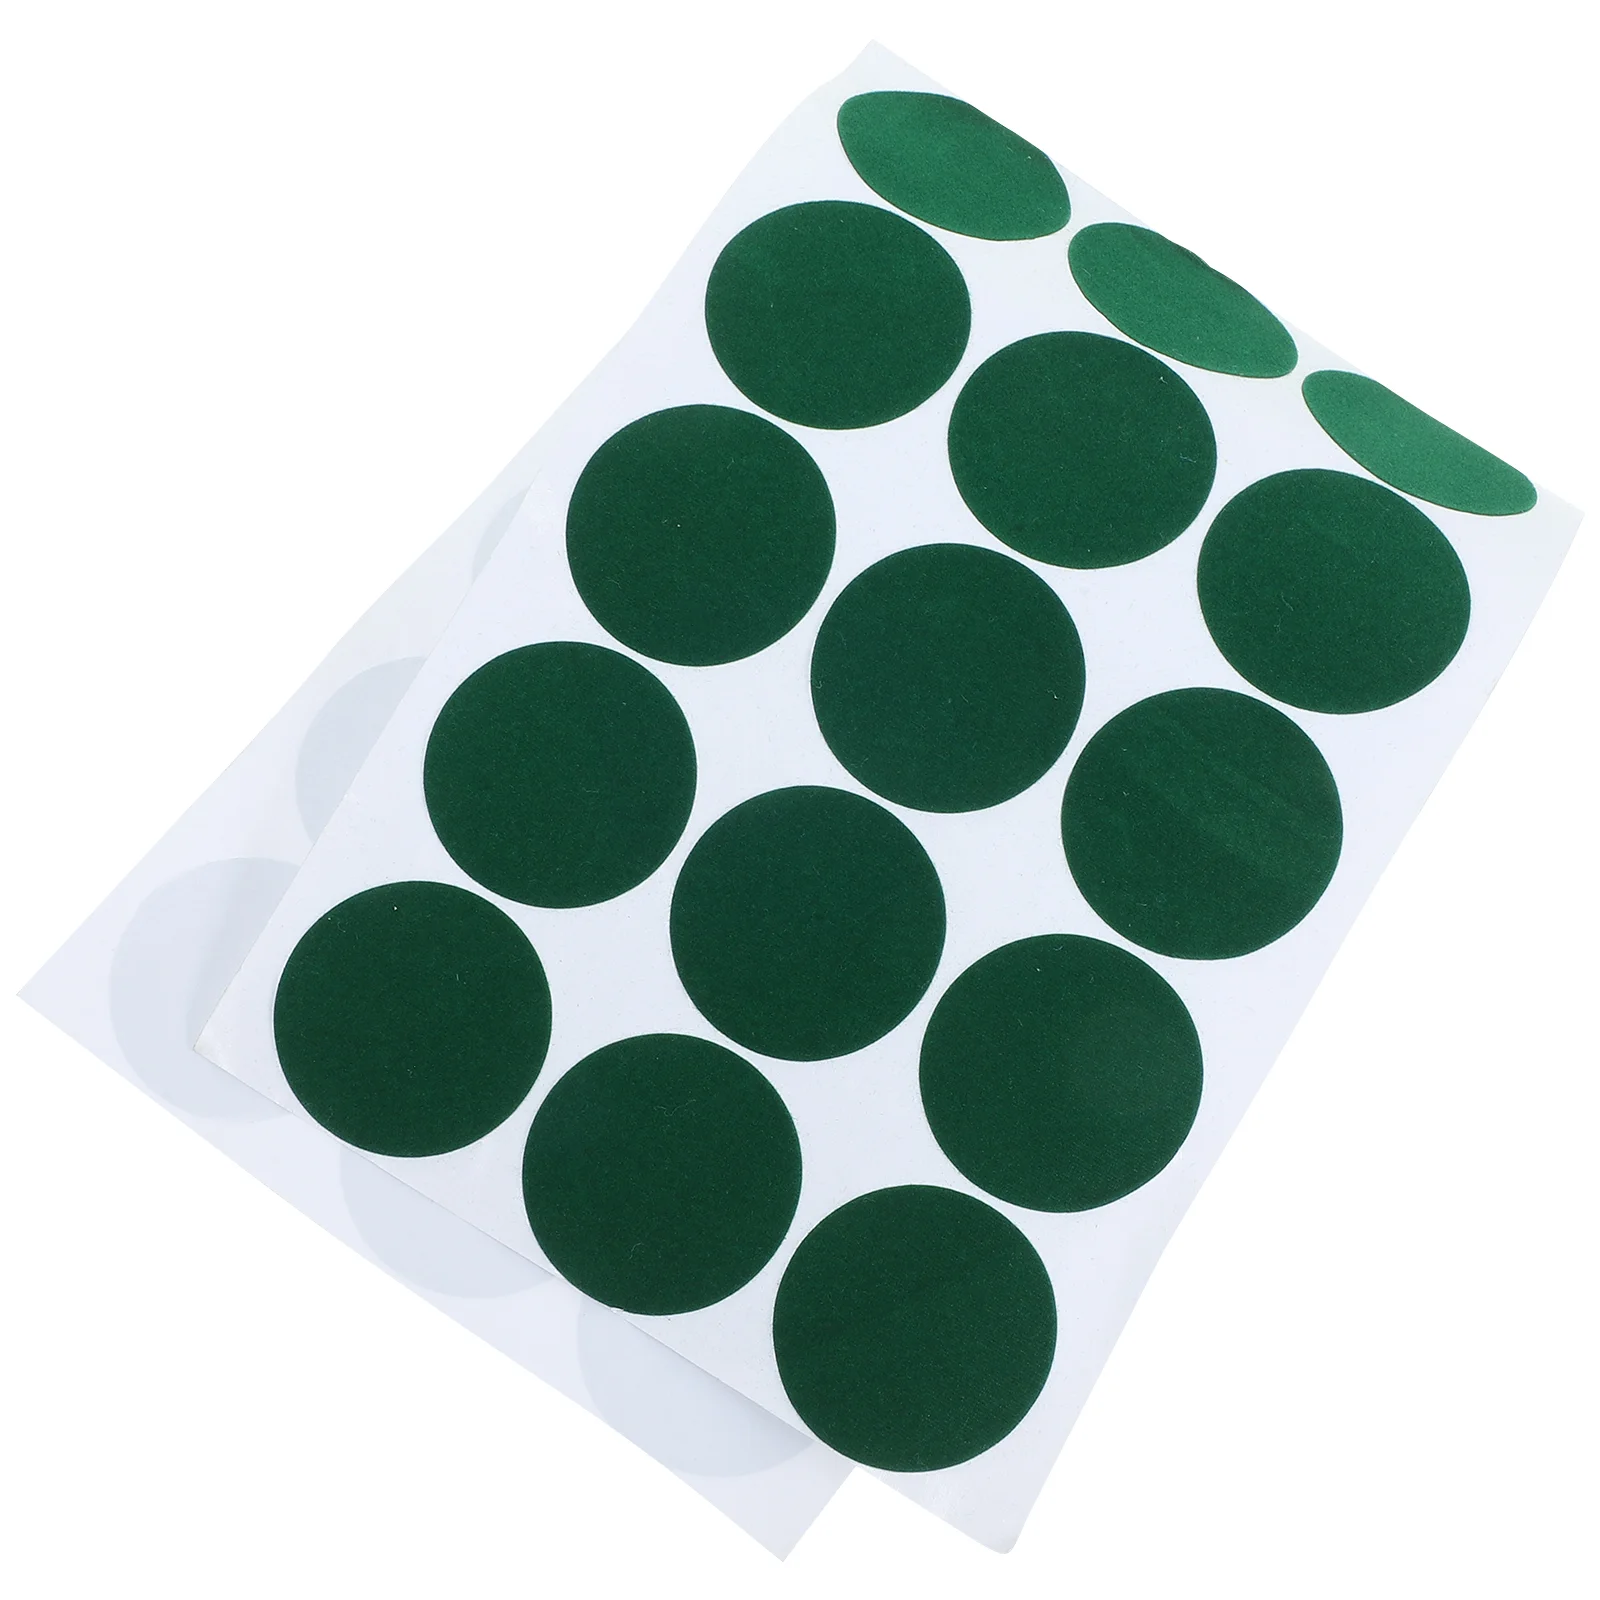 

1 Sheet of Billiard Table Green Patch Pool Billiard Tablecloth Mending Patch Billiard Marking Stickers